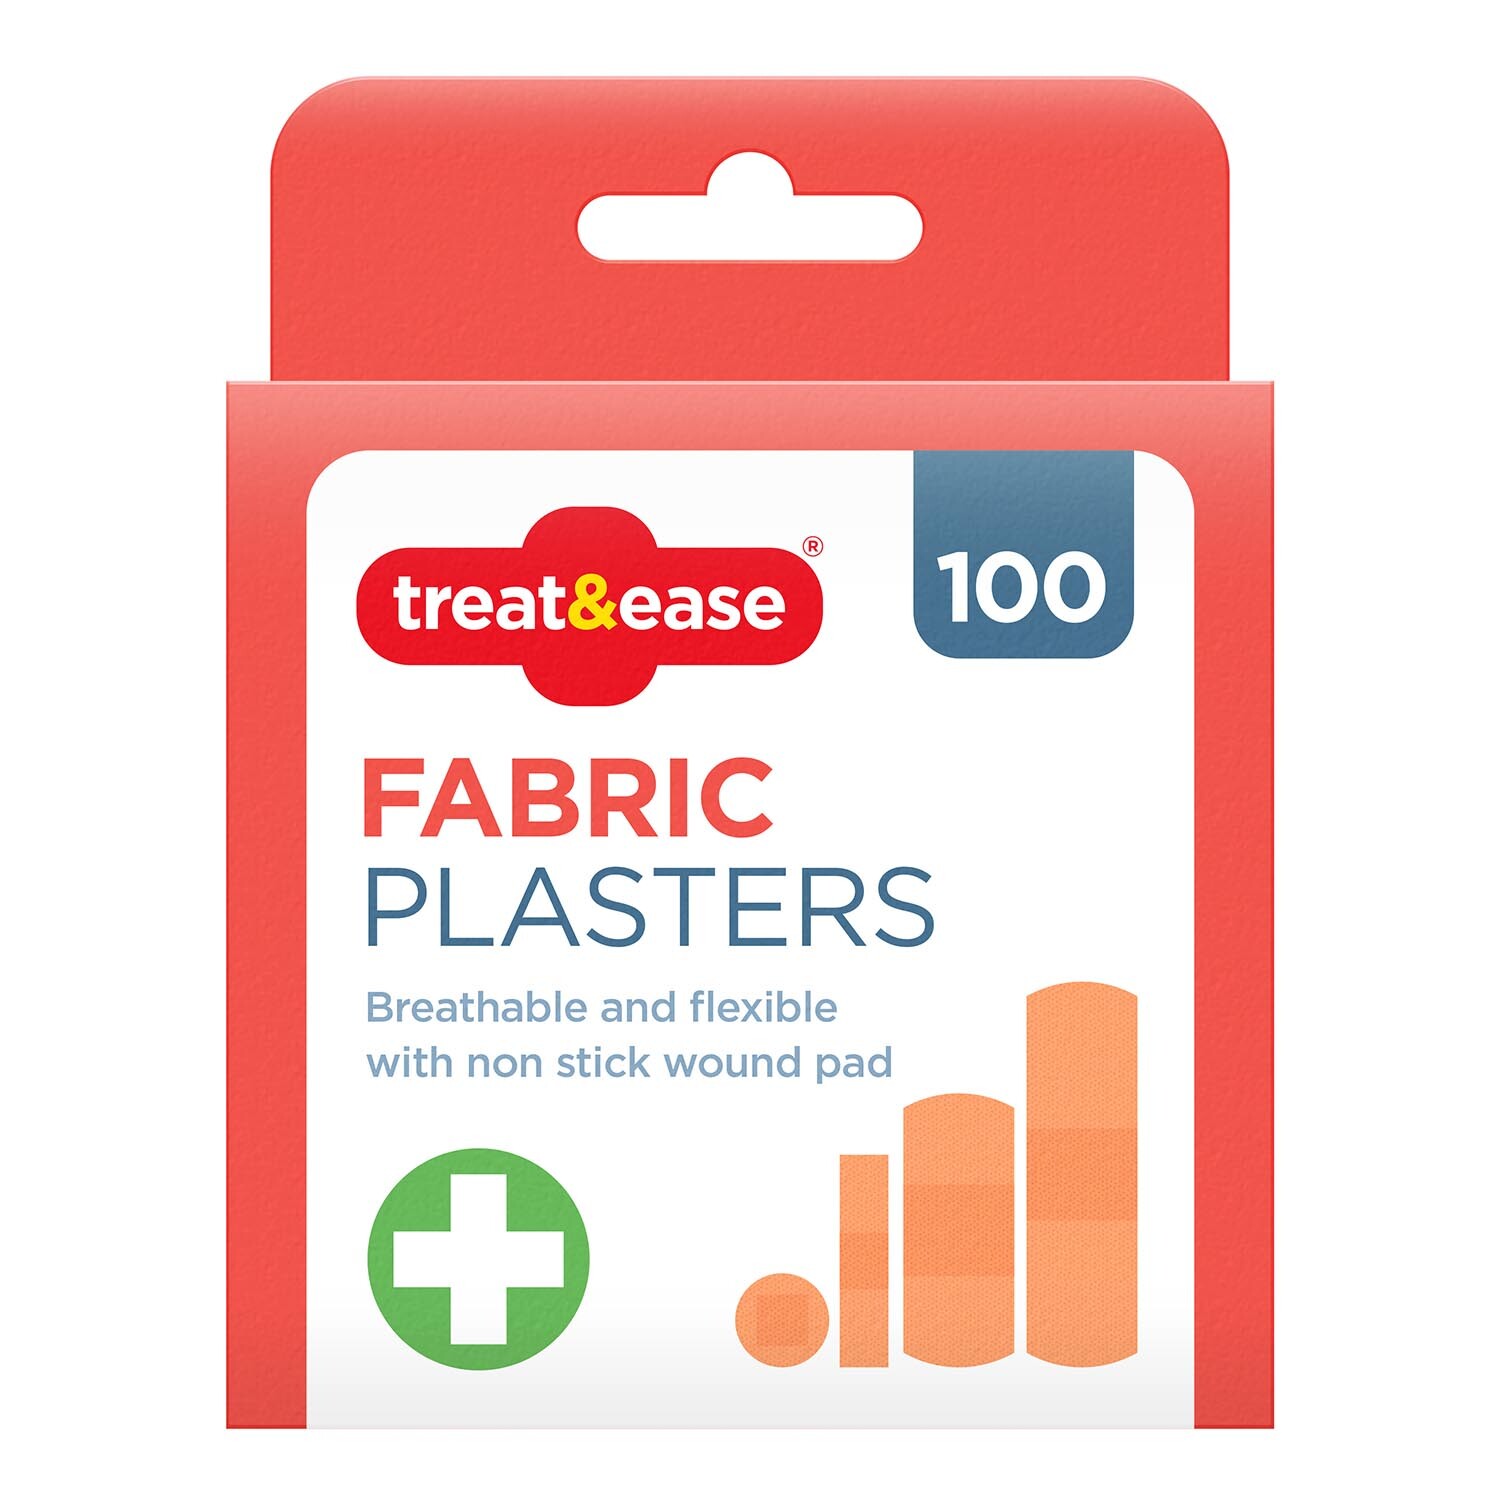 Pack of 100 Fabric Plasters - Red Image